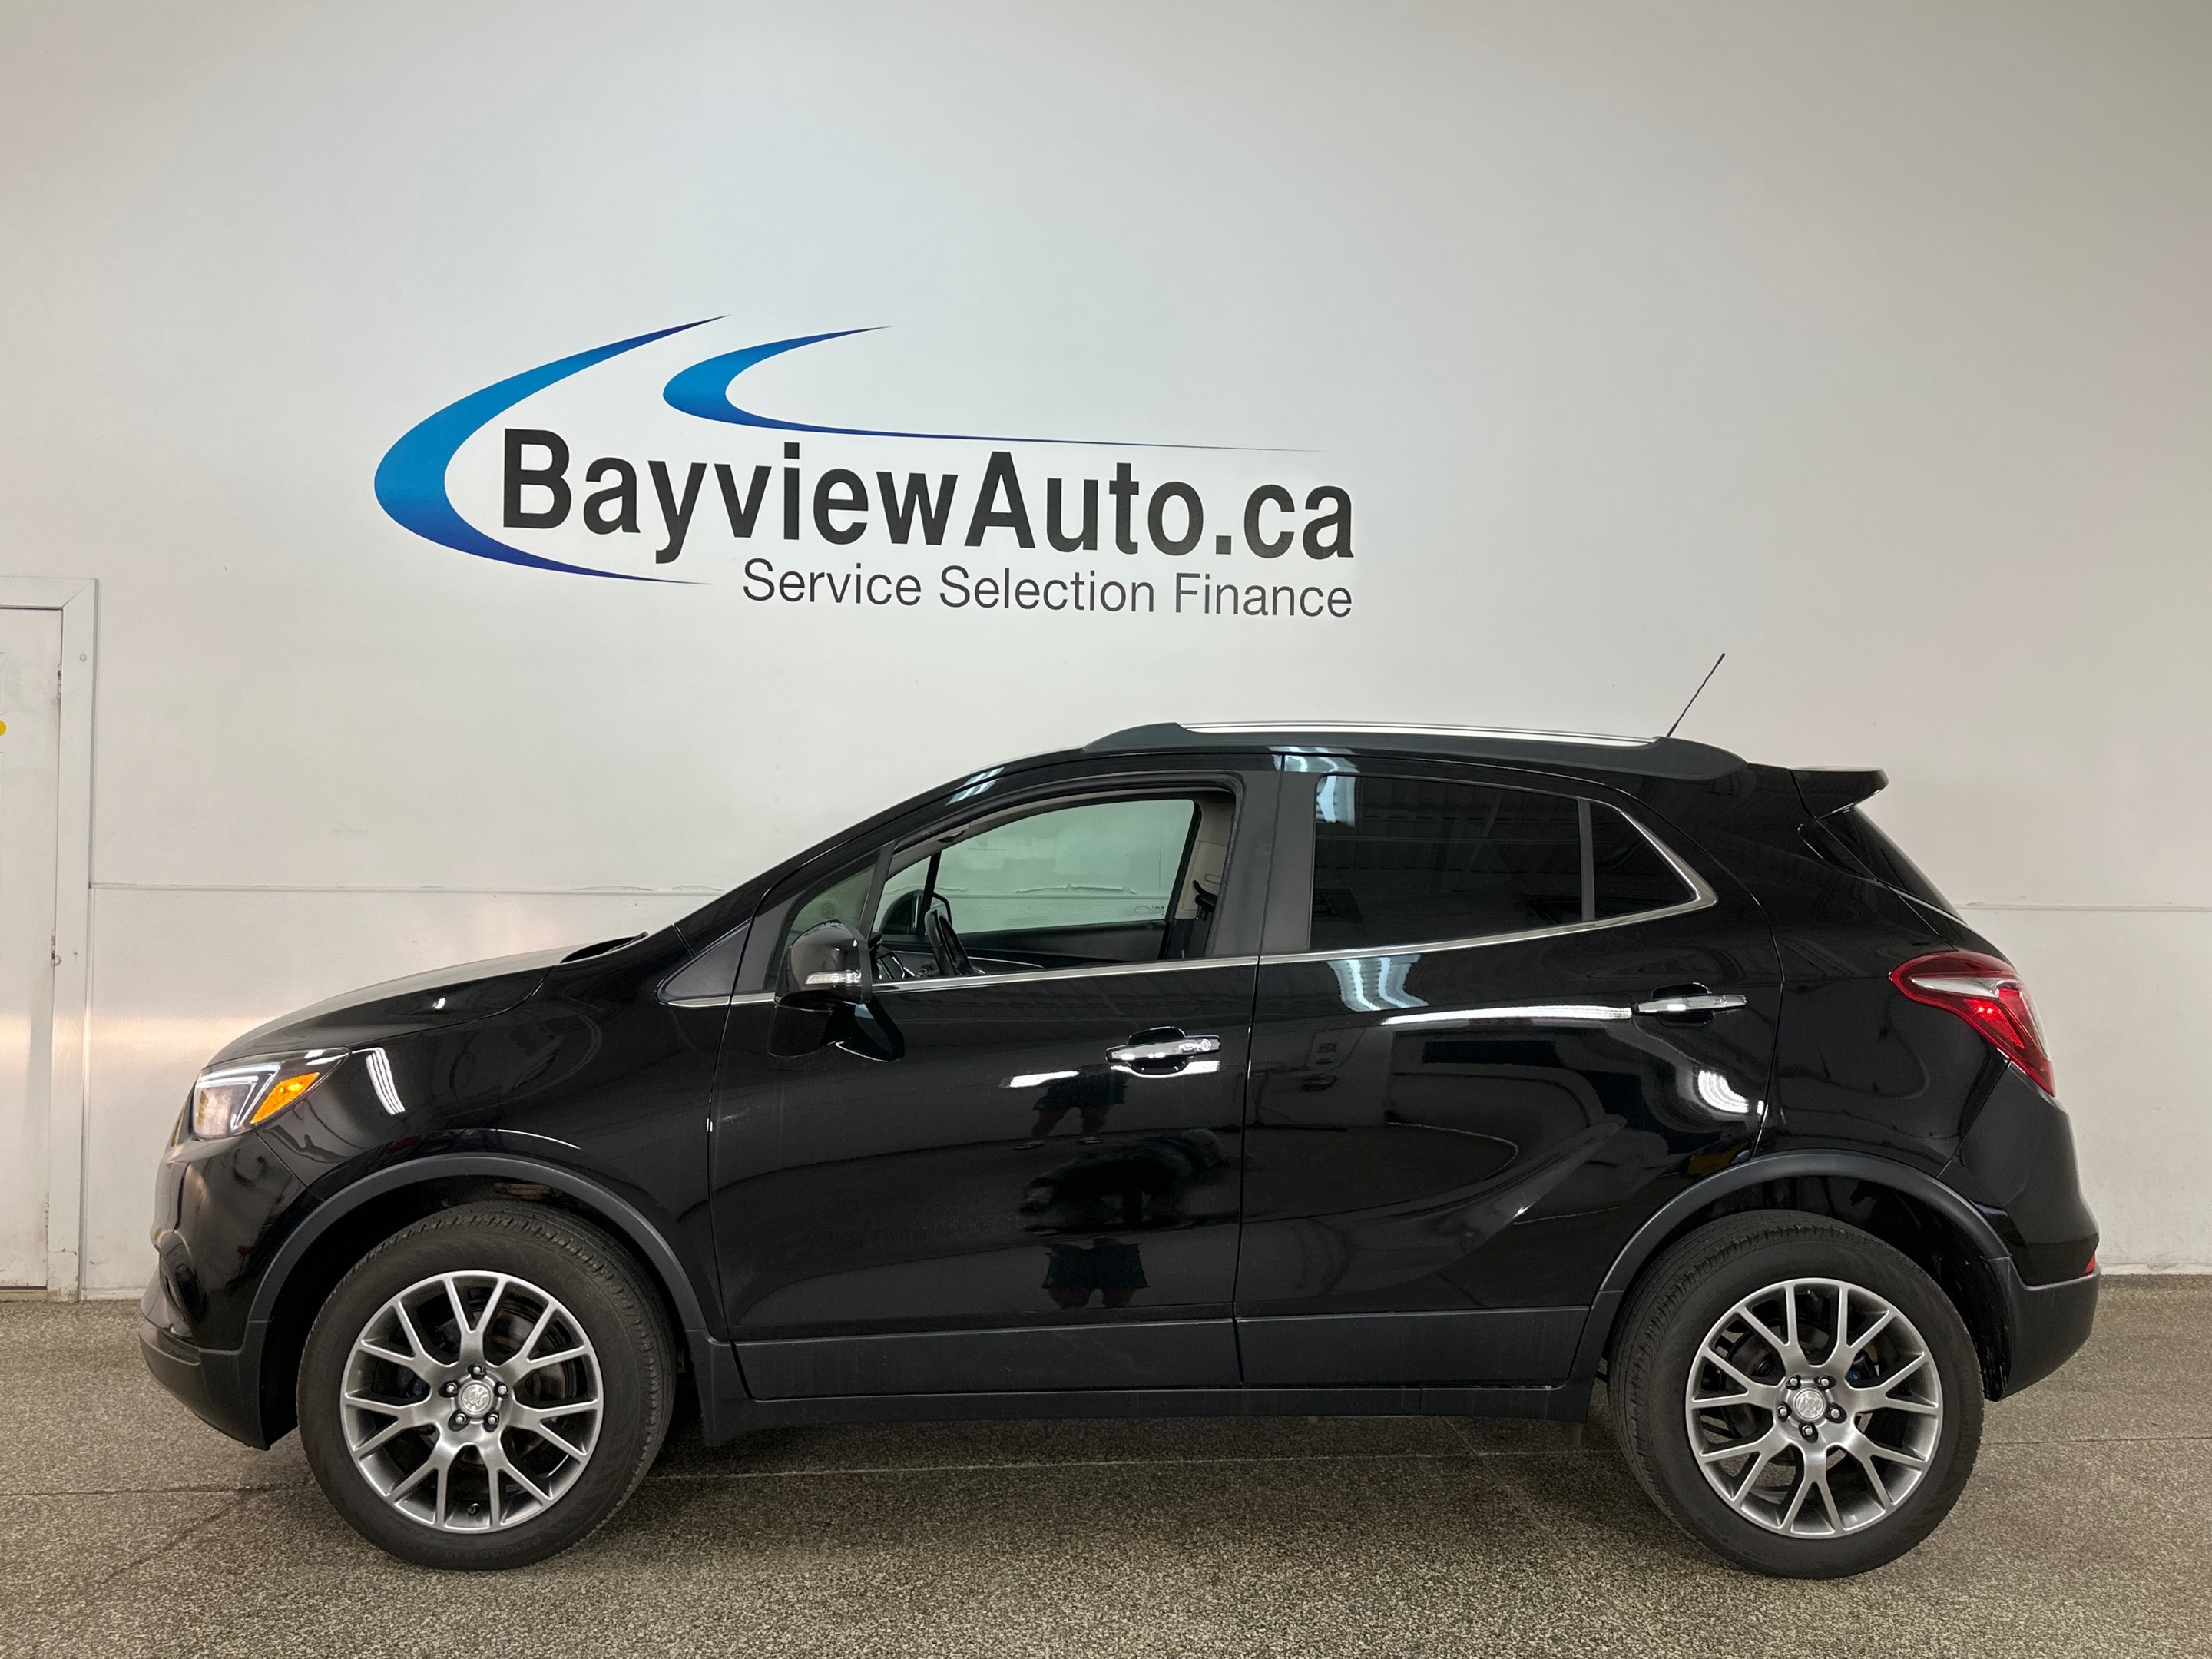 2019 Buick Encore SPORT TOURING AWD ROOF! PWR LEATHER TRIM & MORE!